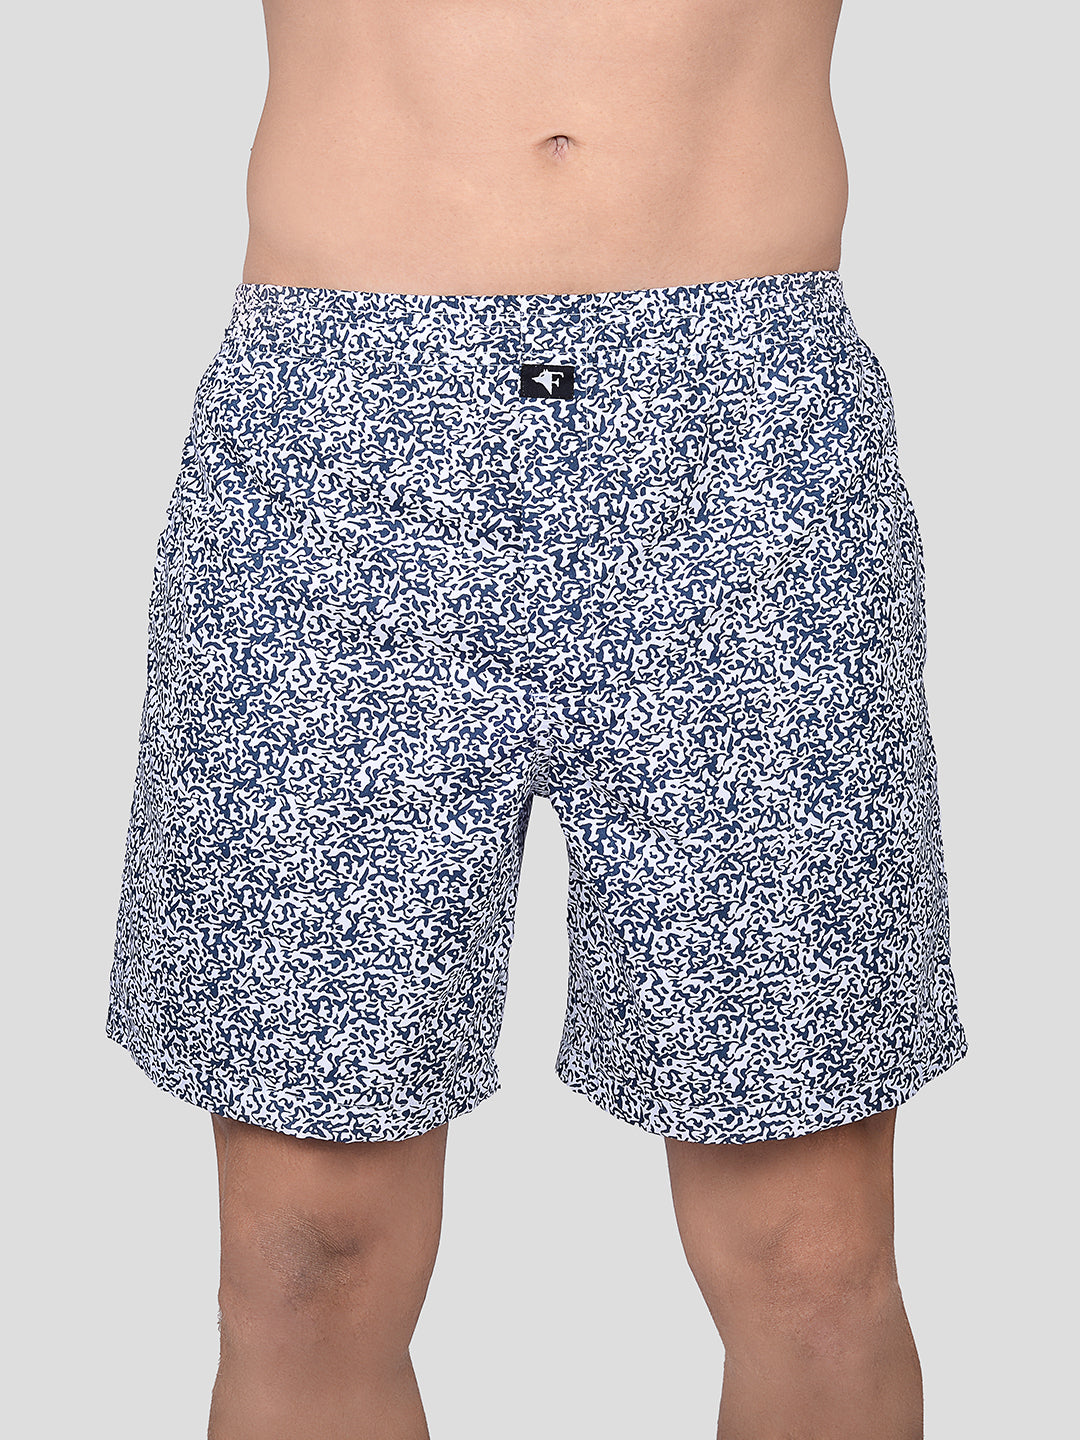 Frenchie Men's Boxer Printed Shorts WA (Assorted)